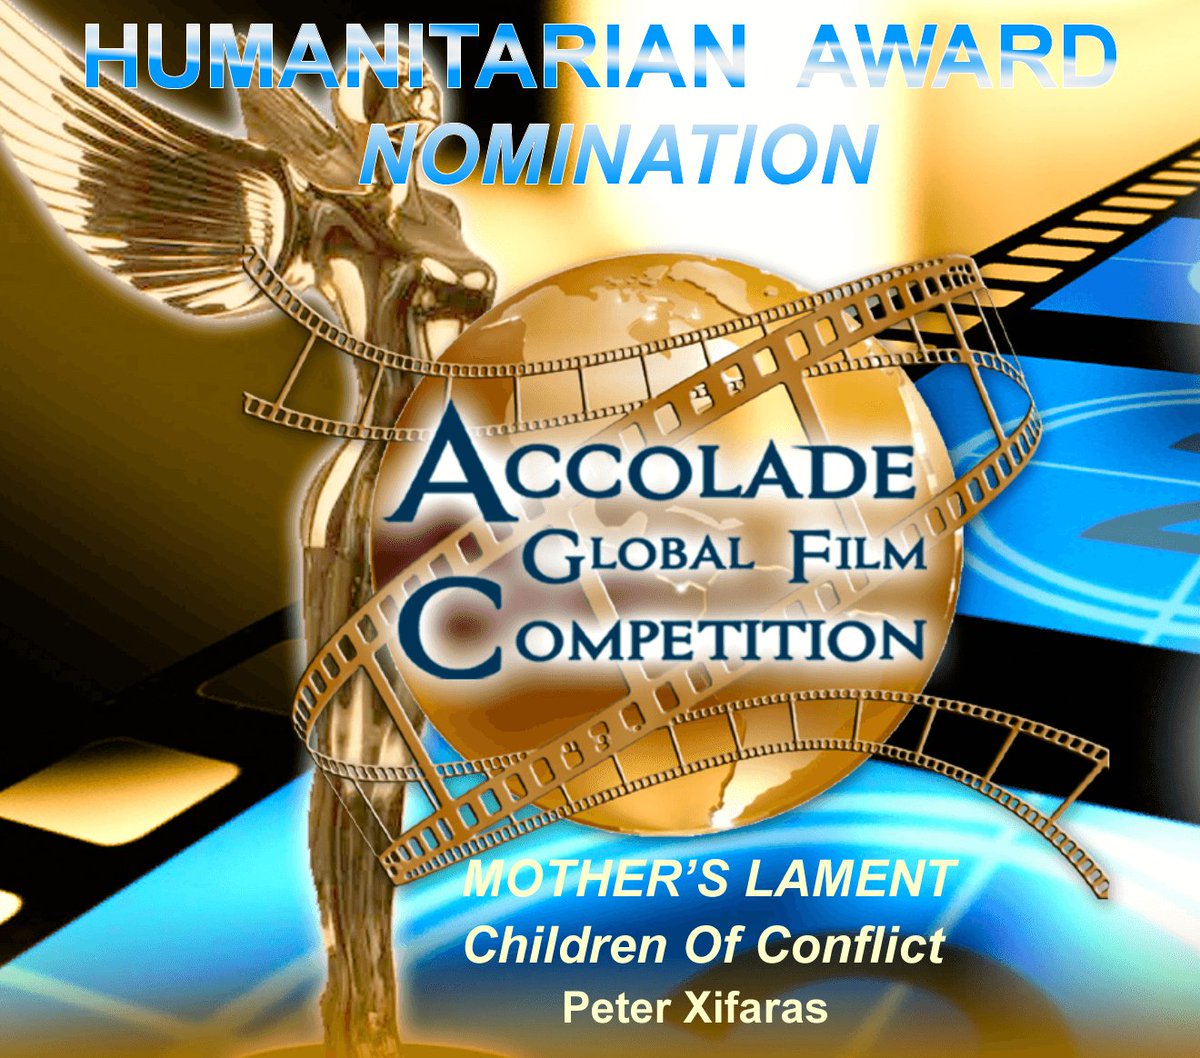 HUMANITARIAN NOMINATION Humbled & thanks to the folks over at the
@AccoladeComp @wearemusiversal 

Music-Video: youtu.be/gtPPtw2kkgc

#ukraine #Afghanistan #IranProtests #ChildrenOfConflict